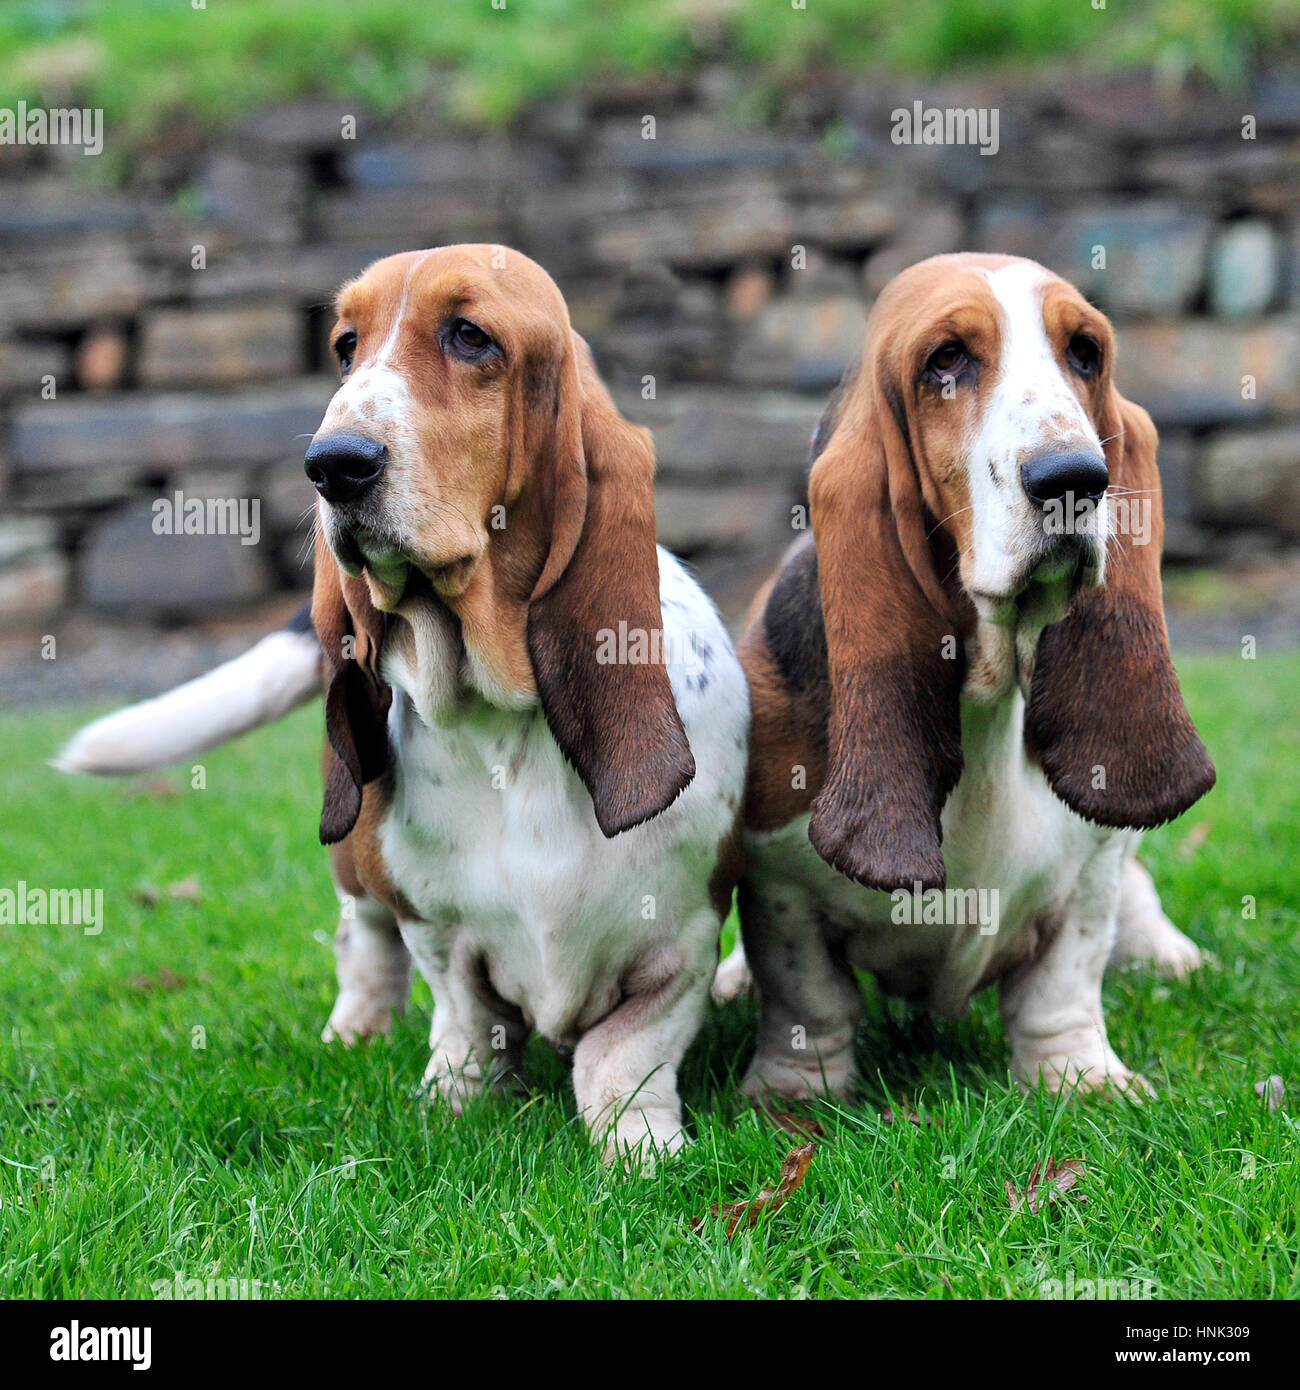 Hush Puppy Dogs High Resolution Stock Photography and Images - Alamy